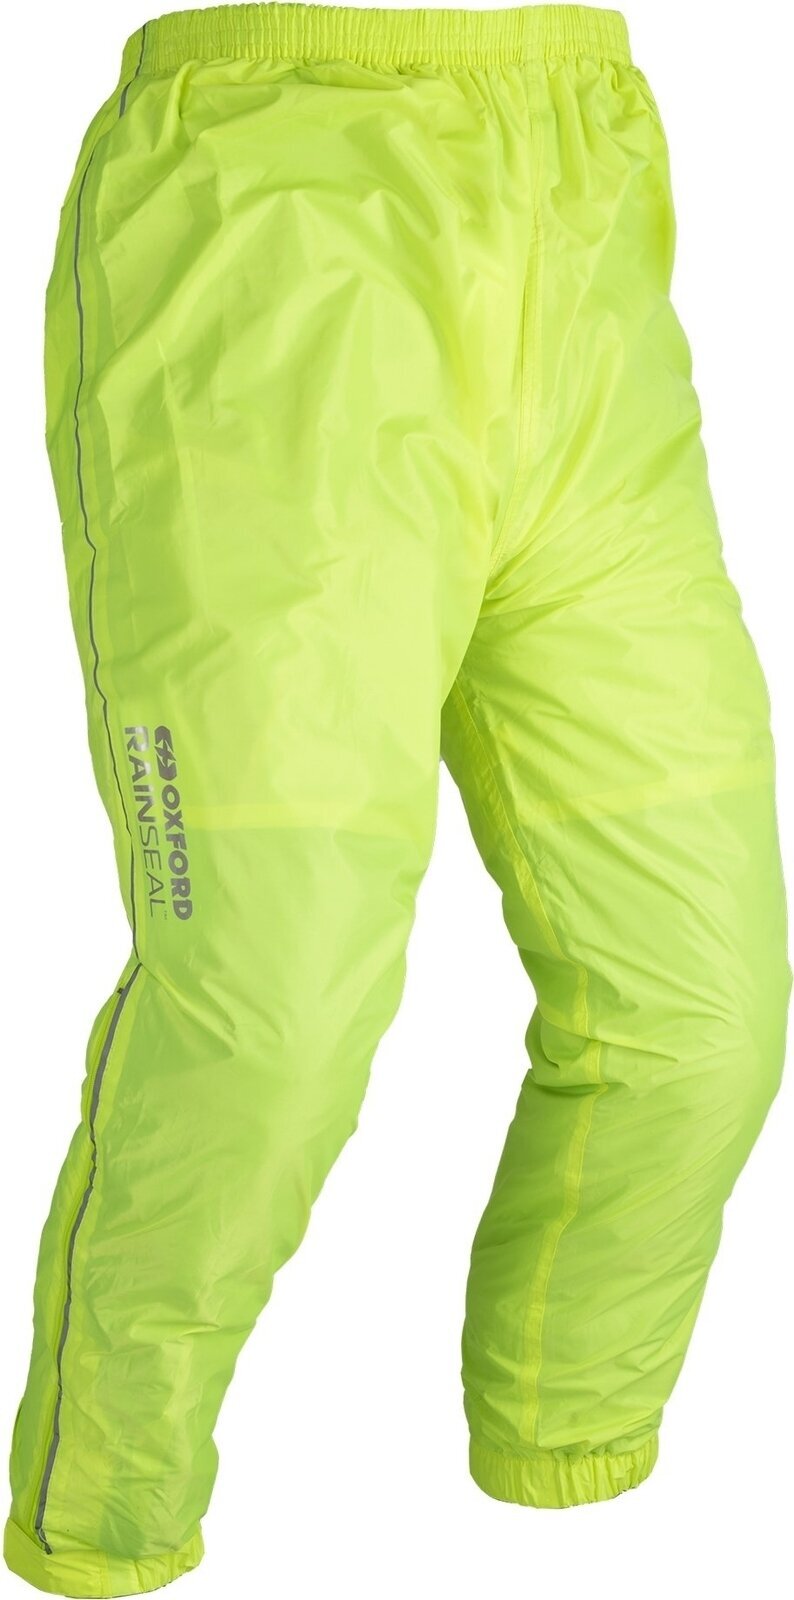 Moto kalhoty do deště Oxford Rainseal Over Trousers Fluo S